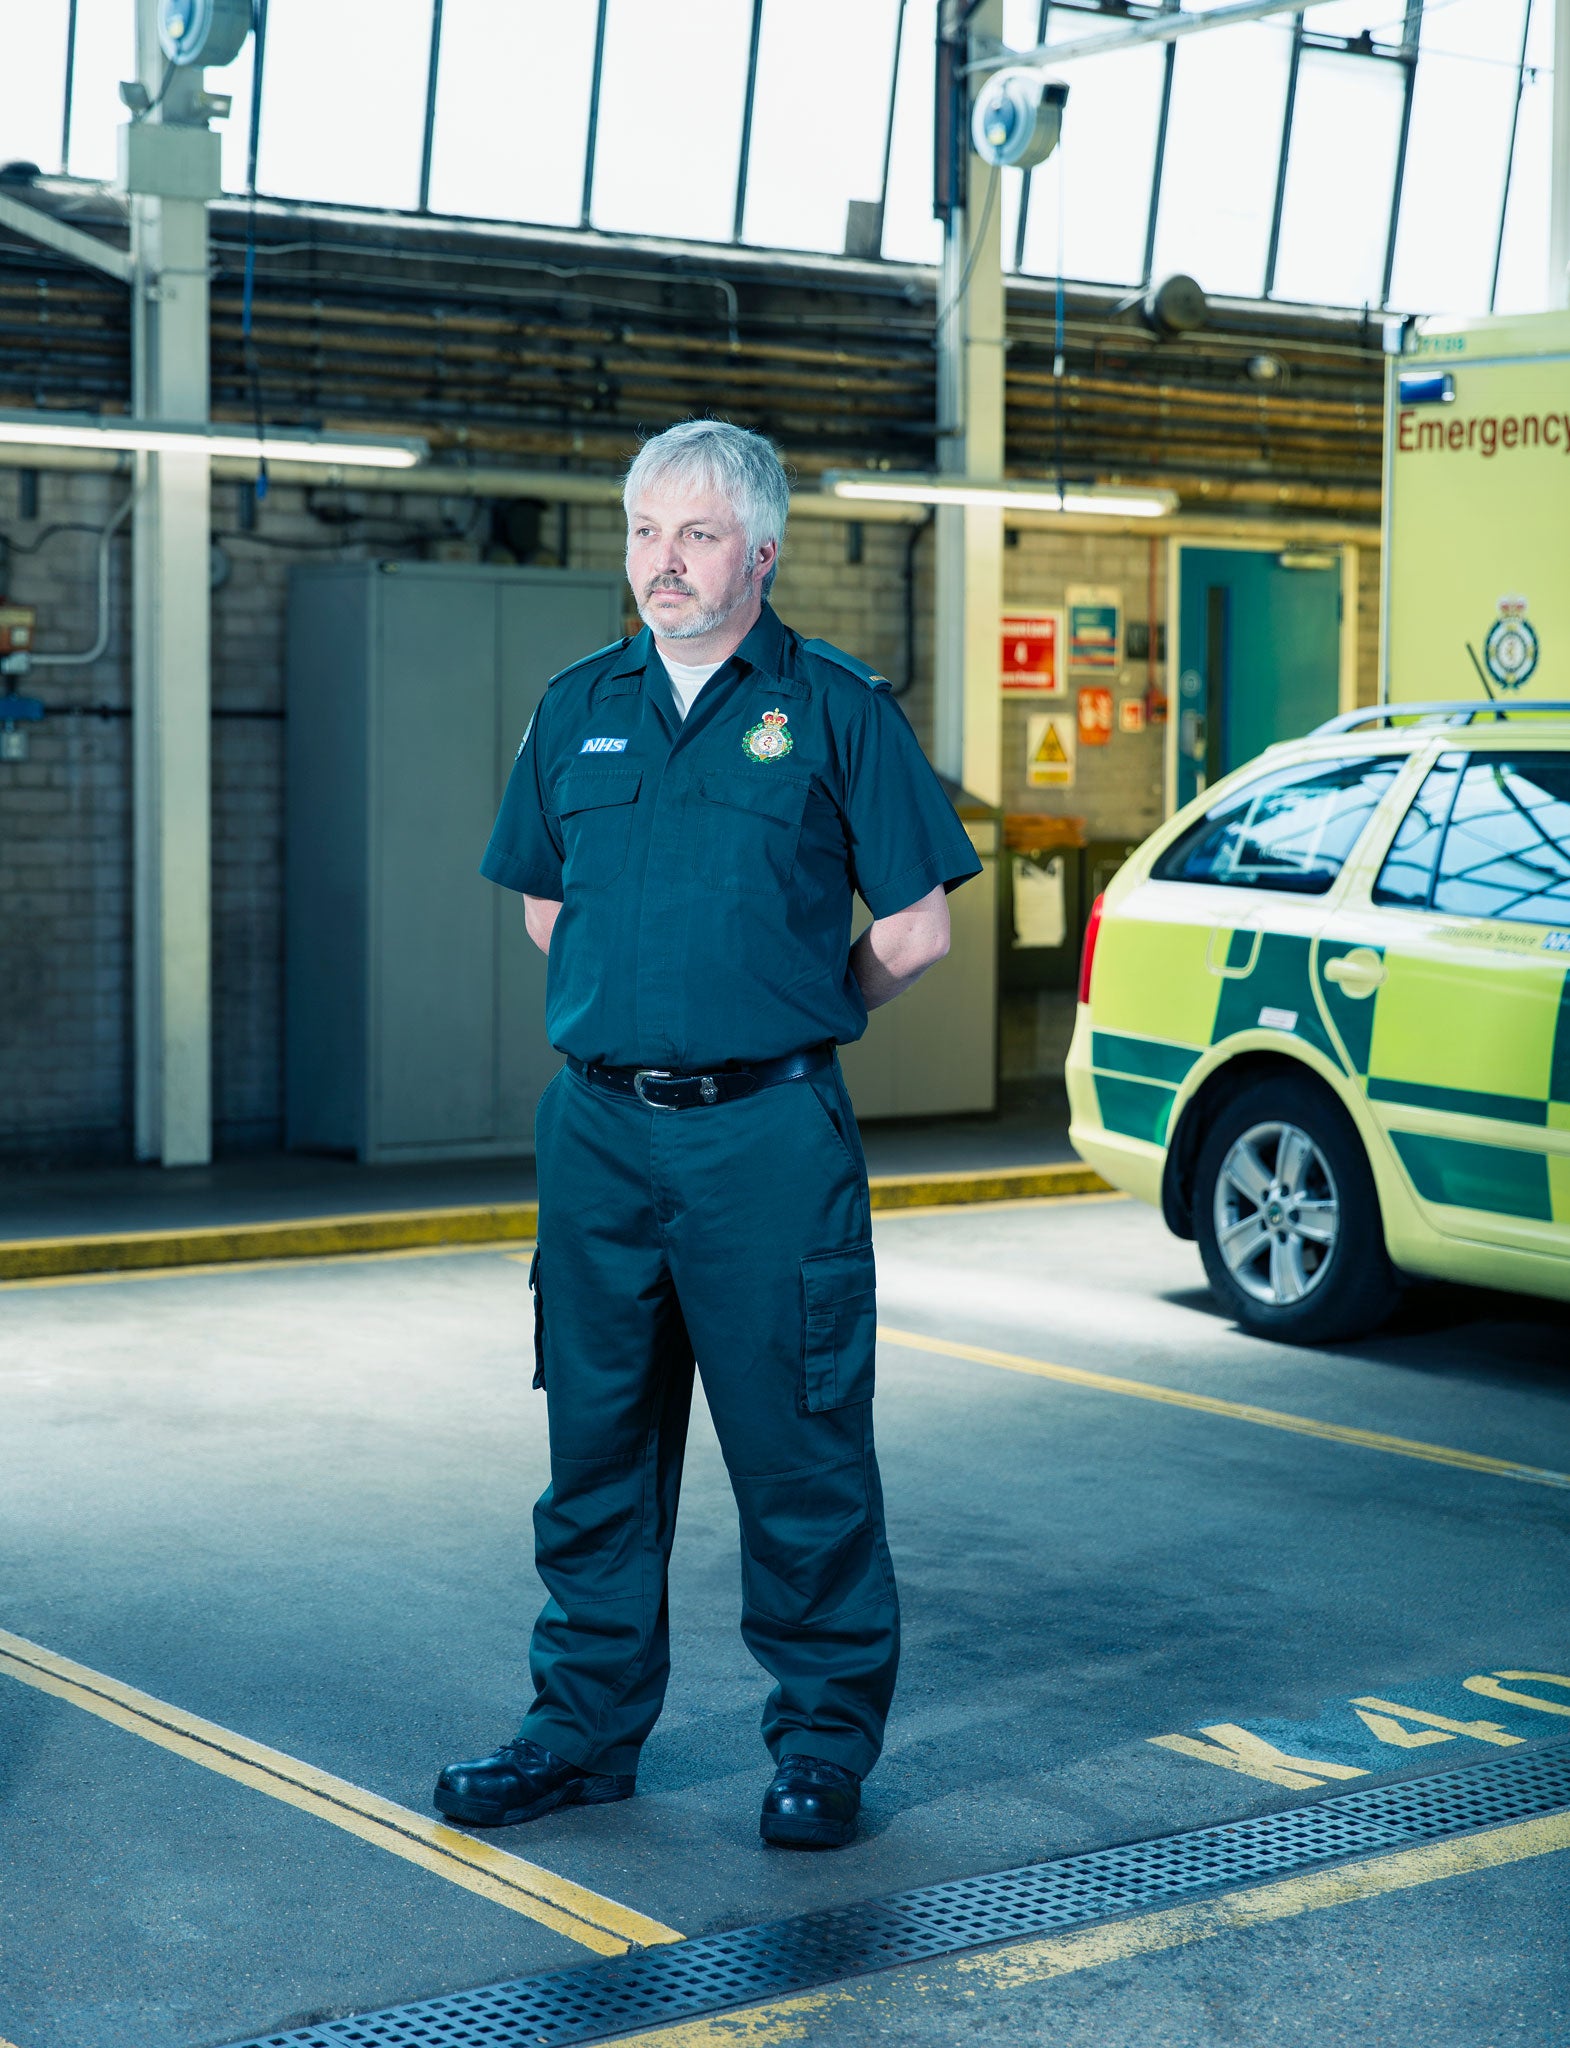 Craig Cassidy was one of the first paramedics on the train at Aldgate and he was the last off: 'When I get out, a colleague tells me I've been down there for an hour. It felt like 20 minutes'